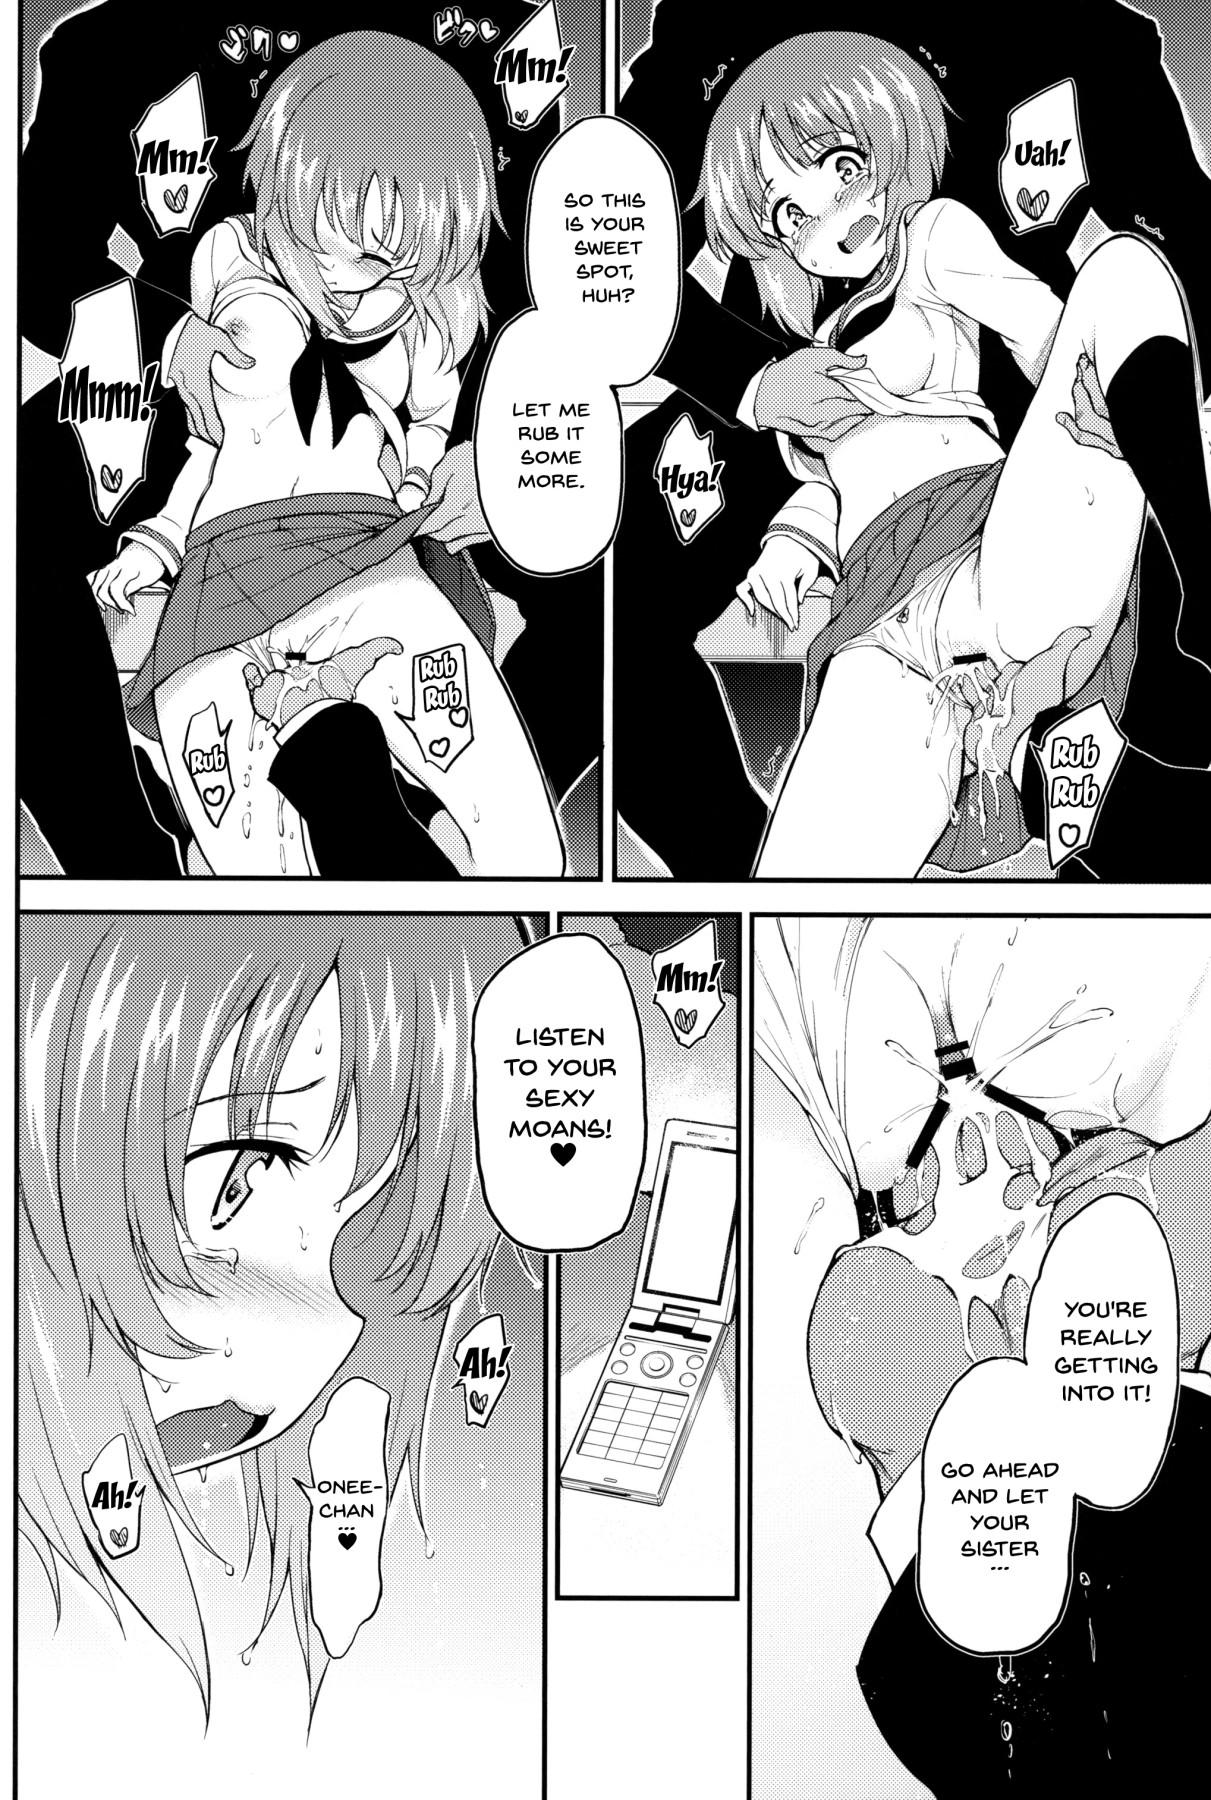 Couple Miho no Heya | Miho's Room - Girls und panzer Swallow - Page 11